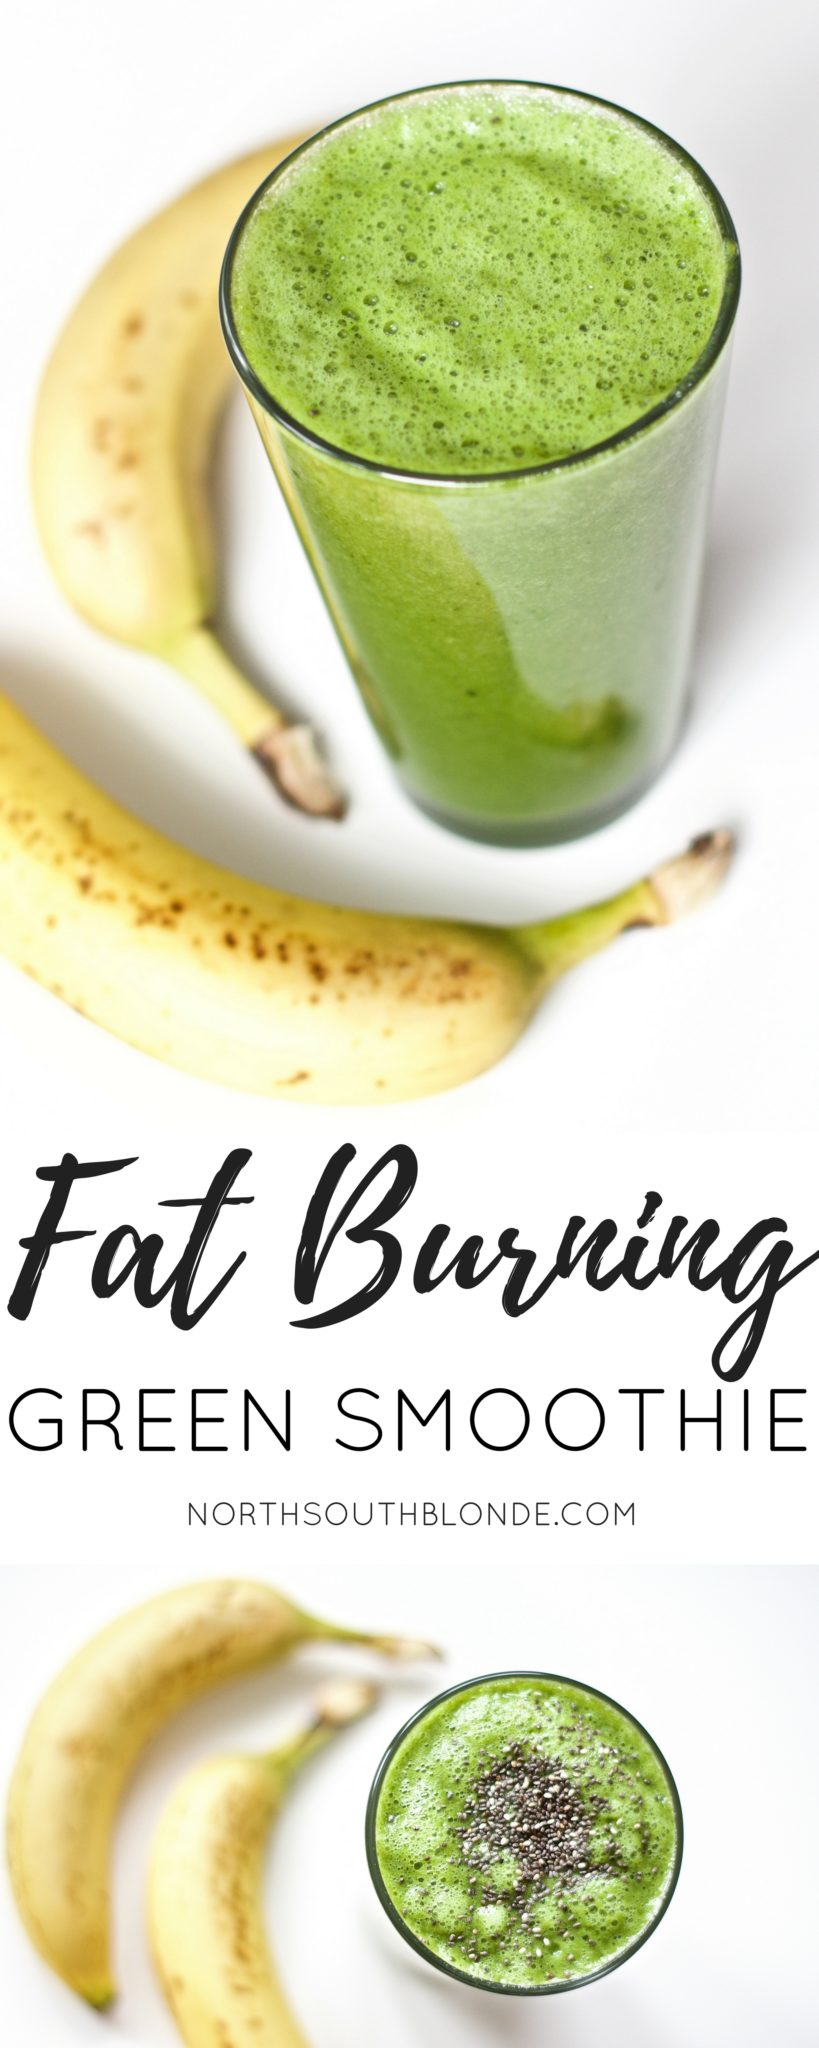 Reach your fitness goals and burn more fat with this antioxidant rich green smoothie recipe. Great for postpartum, post workout, and so much more. Pregnancy | Health | Fitness | Raw | Vegan | Gluten-Free | Paleo | Whole30 | Green Smoothie | Recipe | Healthy | Weight Loss | Superfood | Fat Burning | Metabolism | Immune System | Healthy | Easy | Breakfast | Immune Boosting | Blender Recipe | Green Drink | Dairy Free Smoothie | Anti inflammatory | Anti aging | 